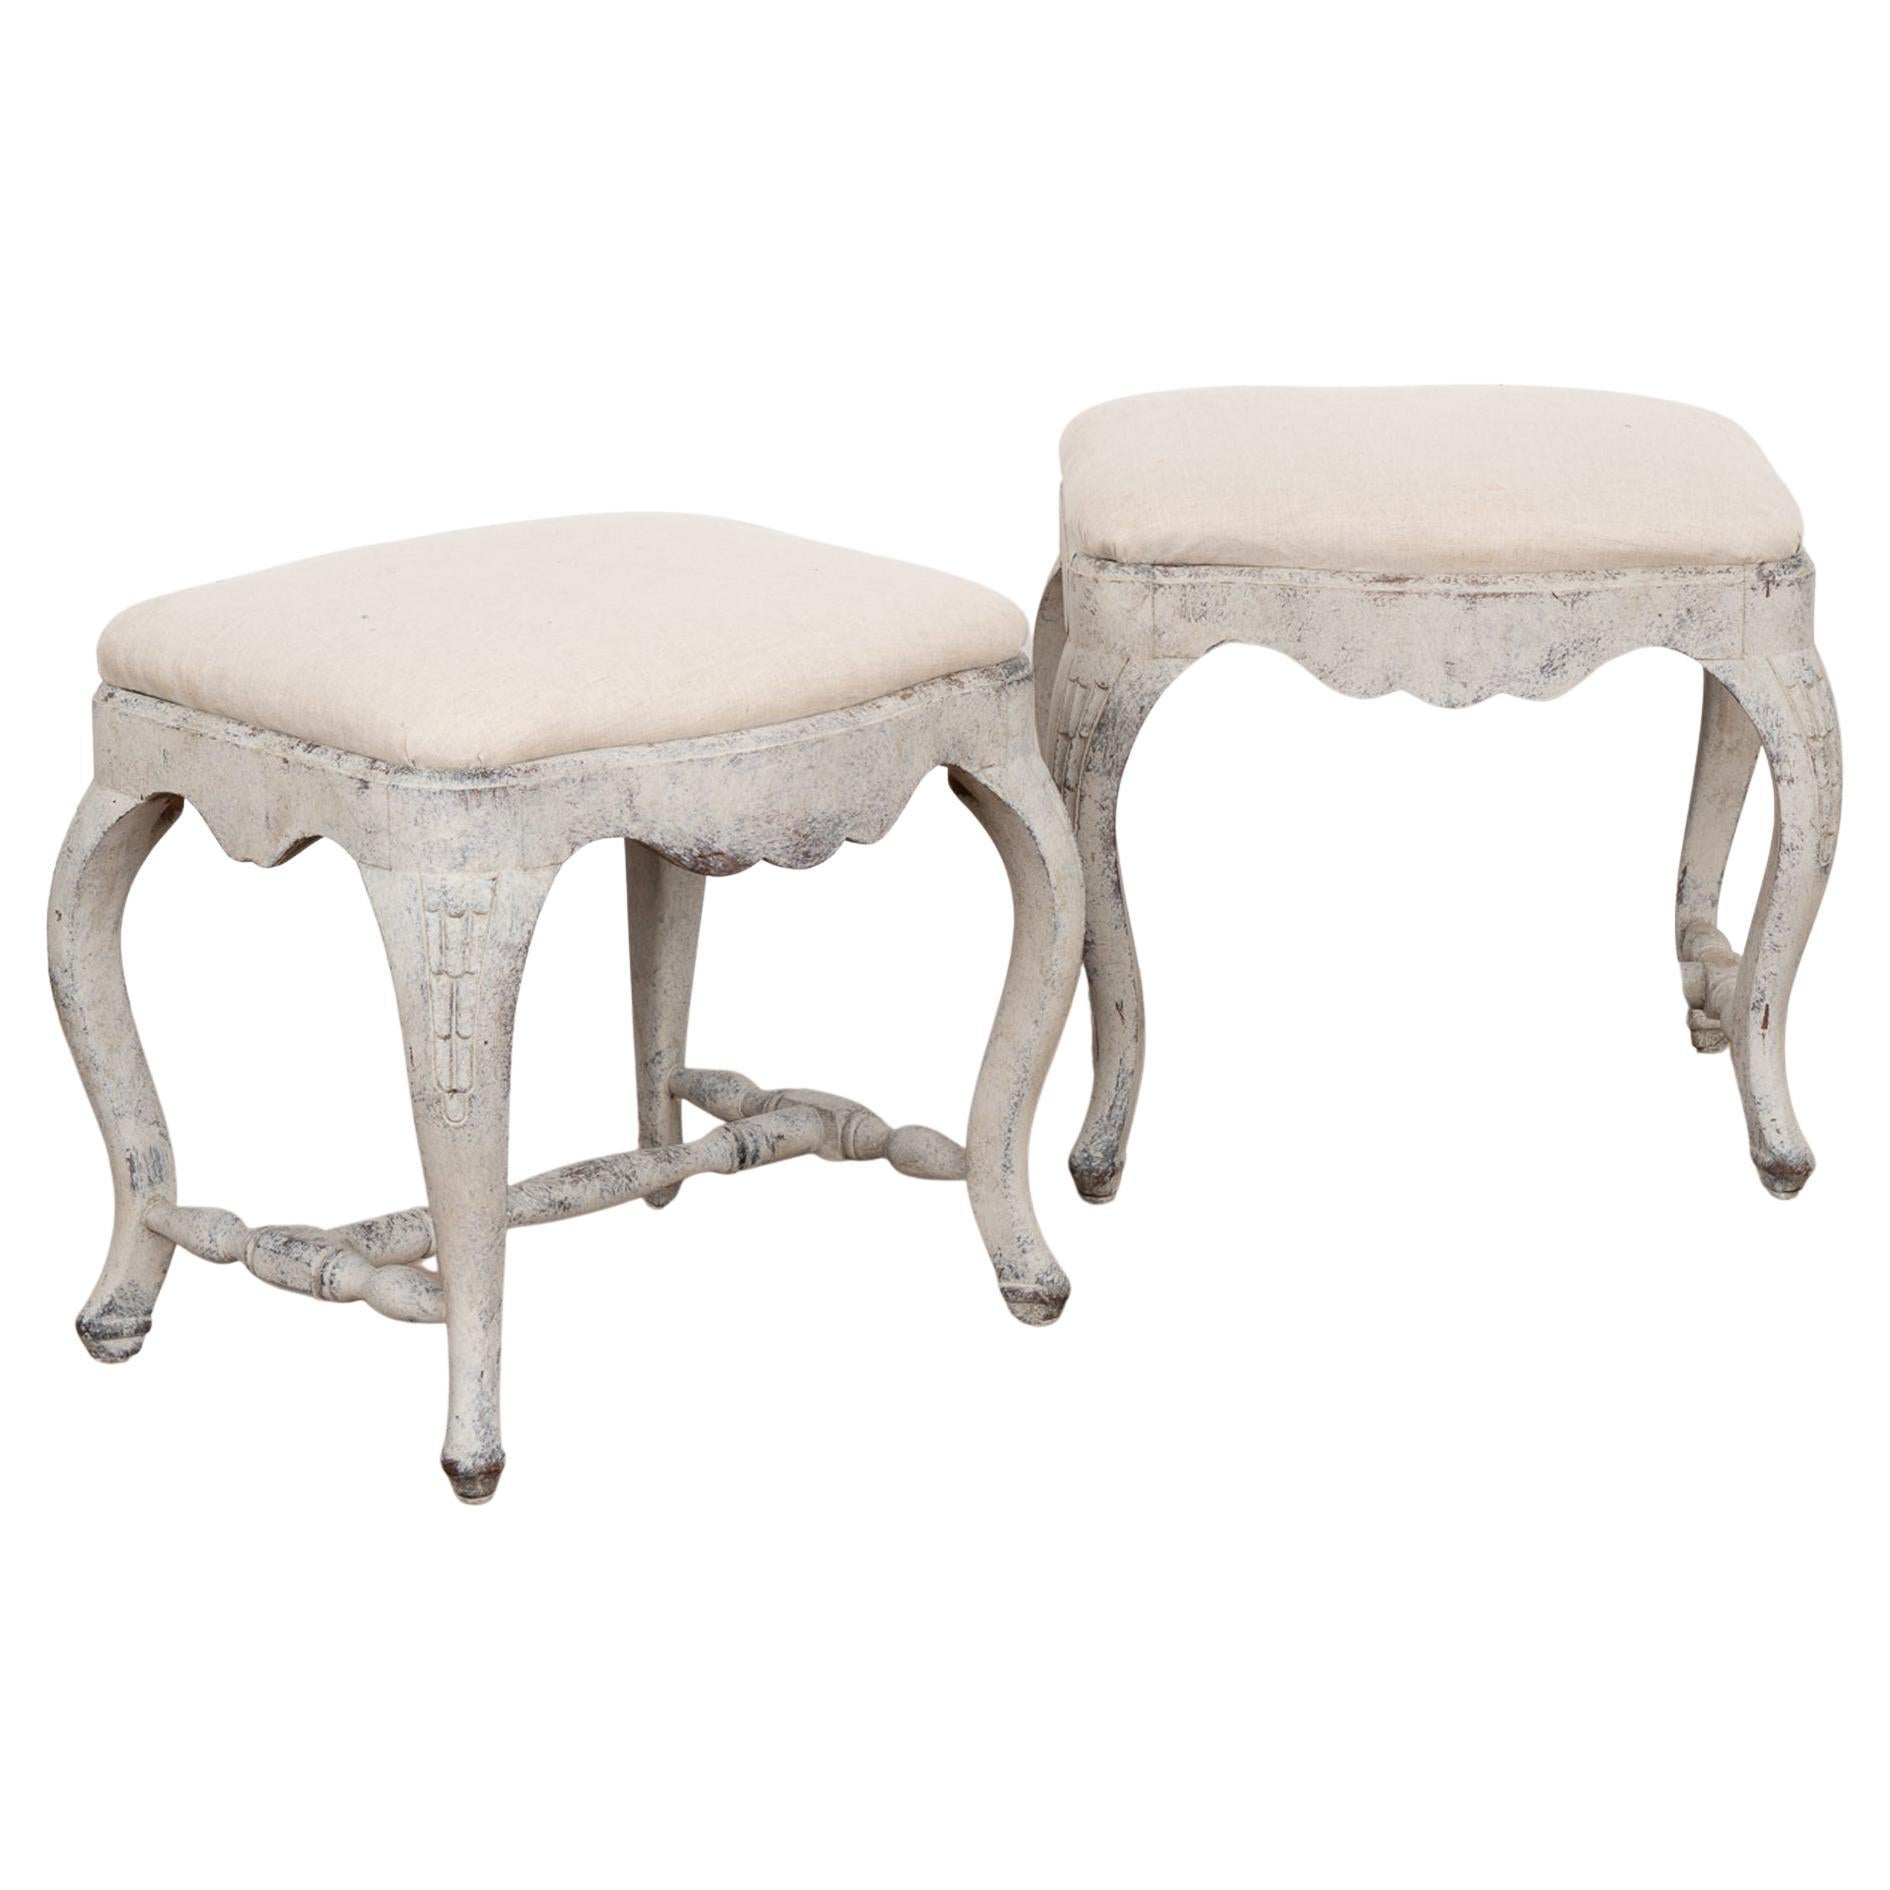 Pair, Antique Gray Painted Stools or Tabourets from Sweden, circa 1870